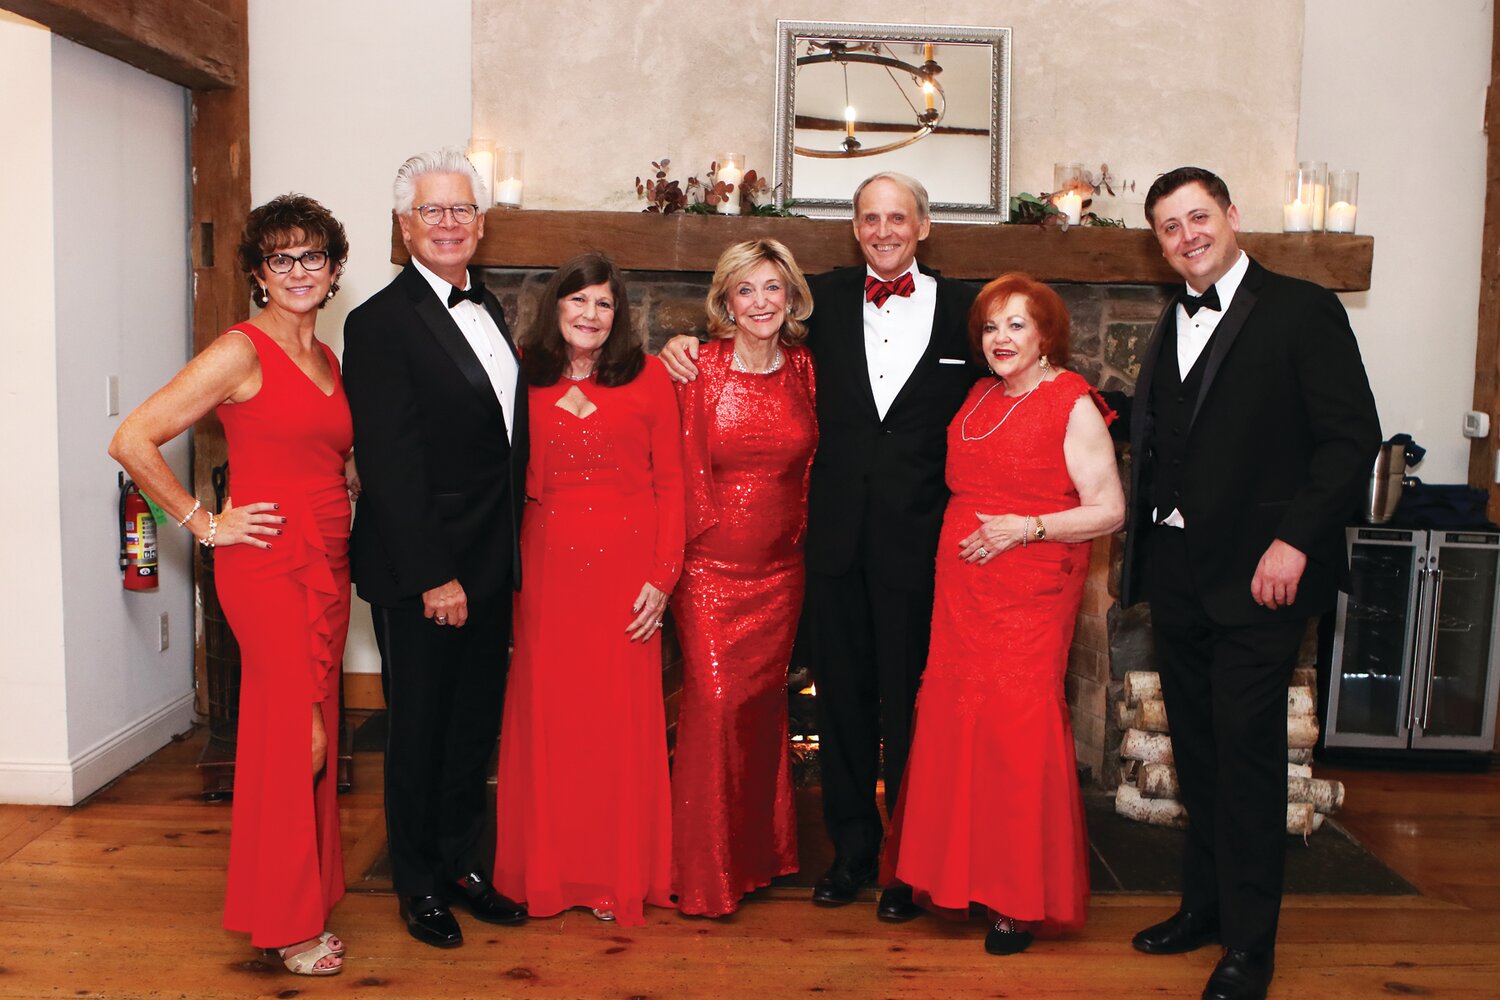 Beth Hohberger, Eric Hopkins, co-chair; Debbie Wagner, co-chair; Vail Garvin, John Bray, Barbara Donnelly Bentivoglio and Tony Bagonis, some of the members of the Red Ball Gala Committee.